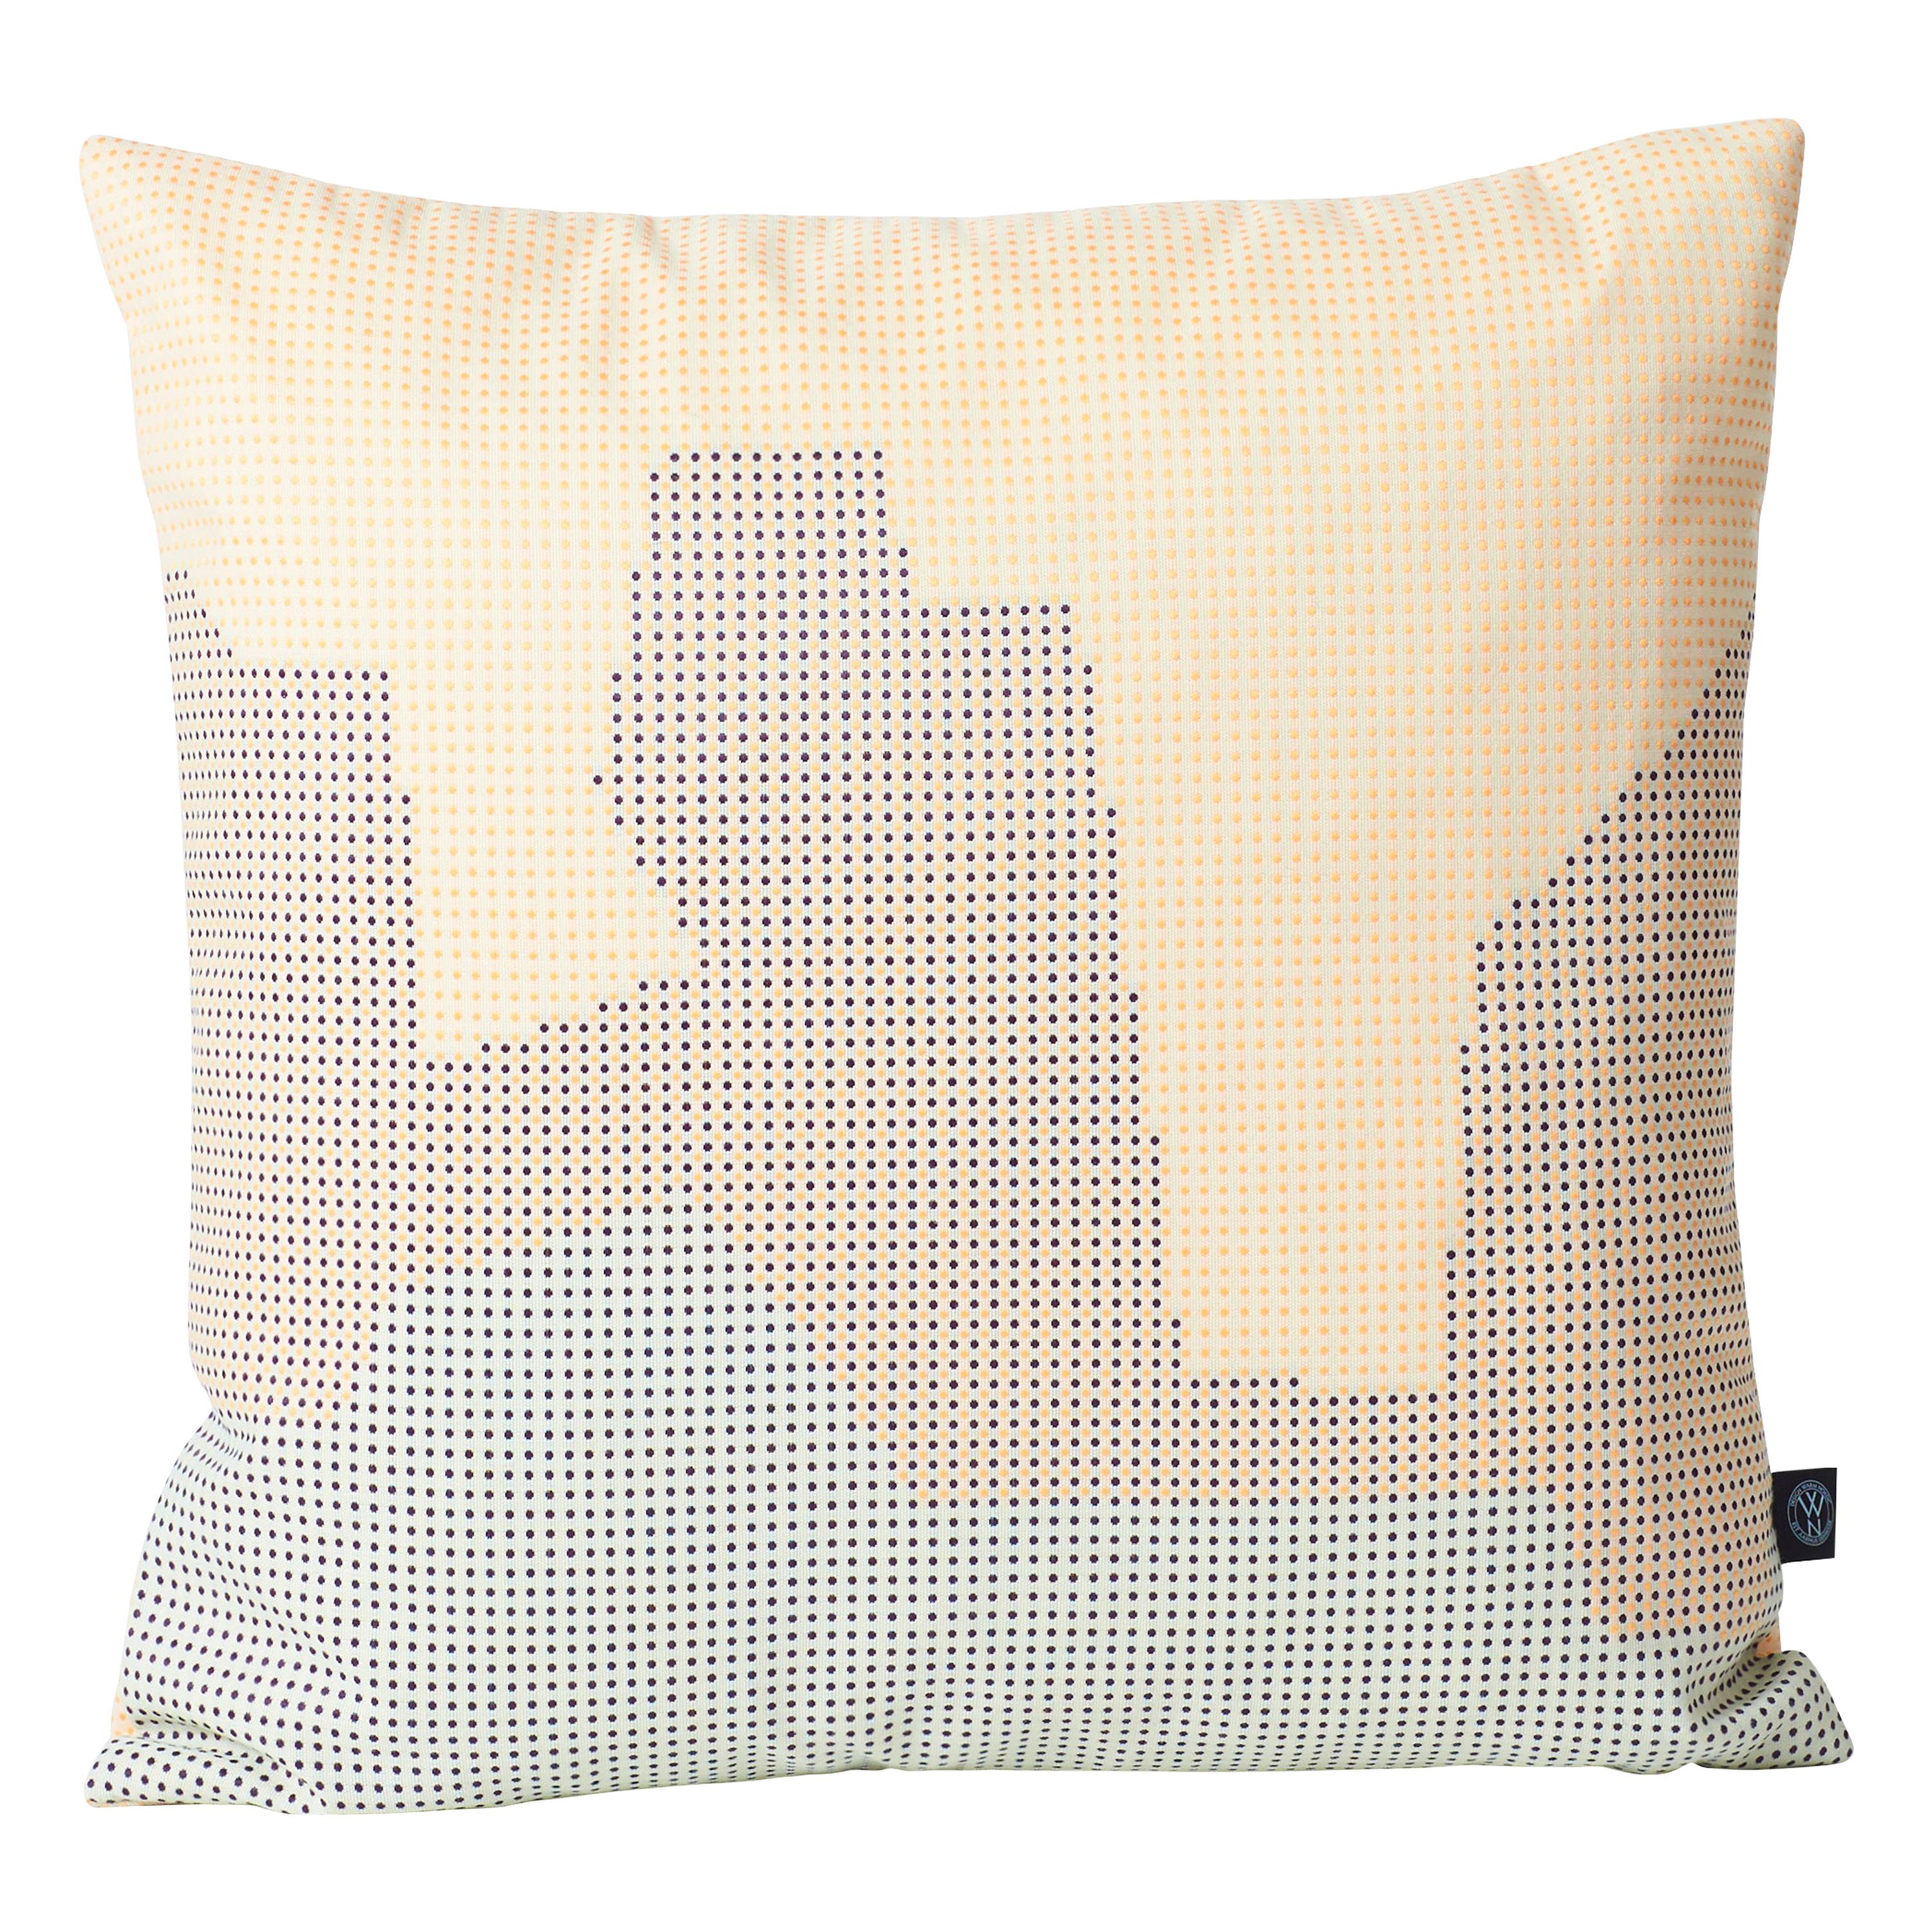 Sprinkle Map Cushion, by Warm Nordic